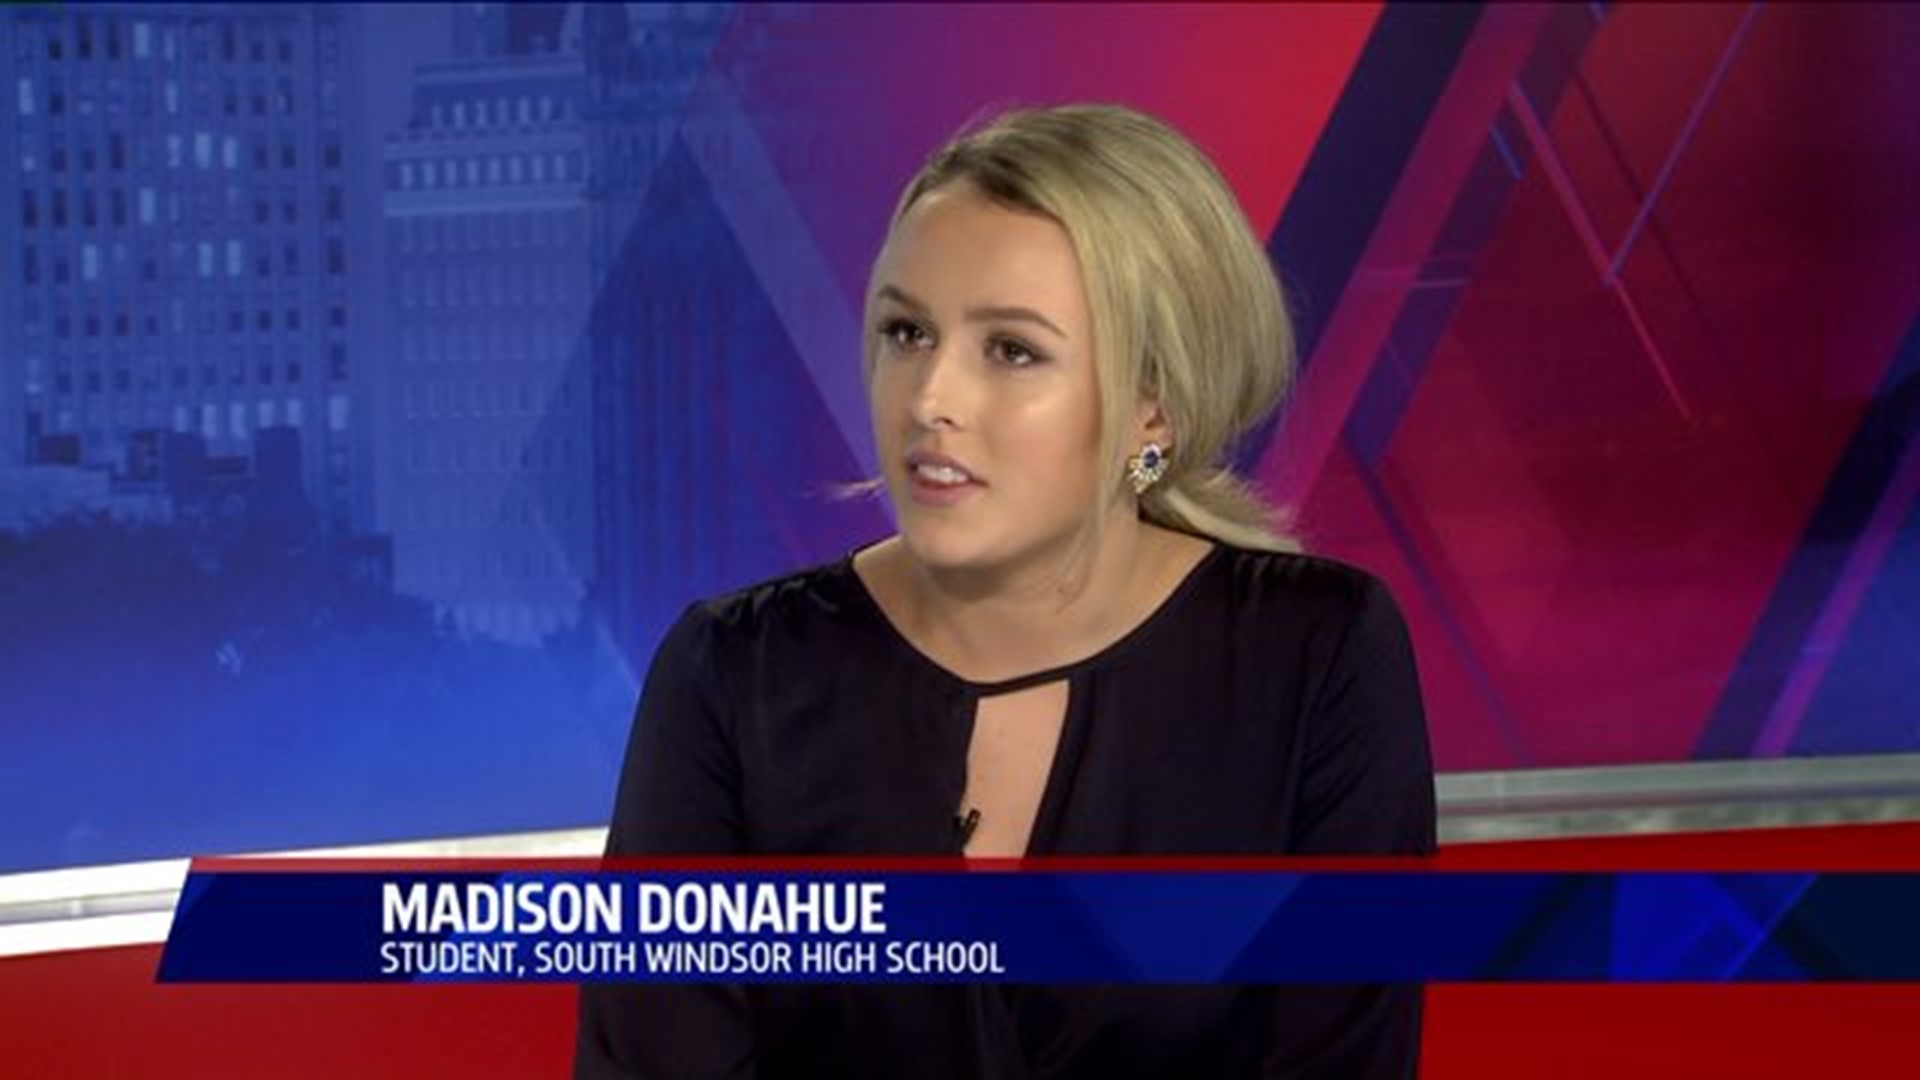 Student News reporter Madison Donahue talks about her project